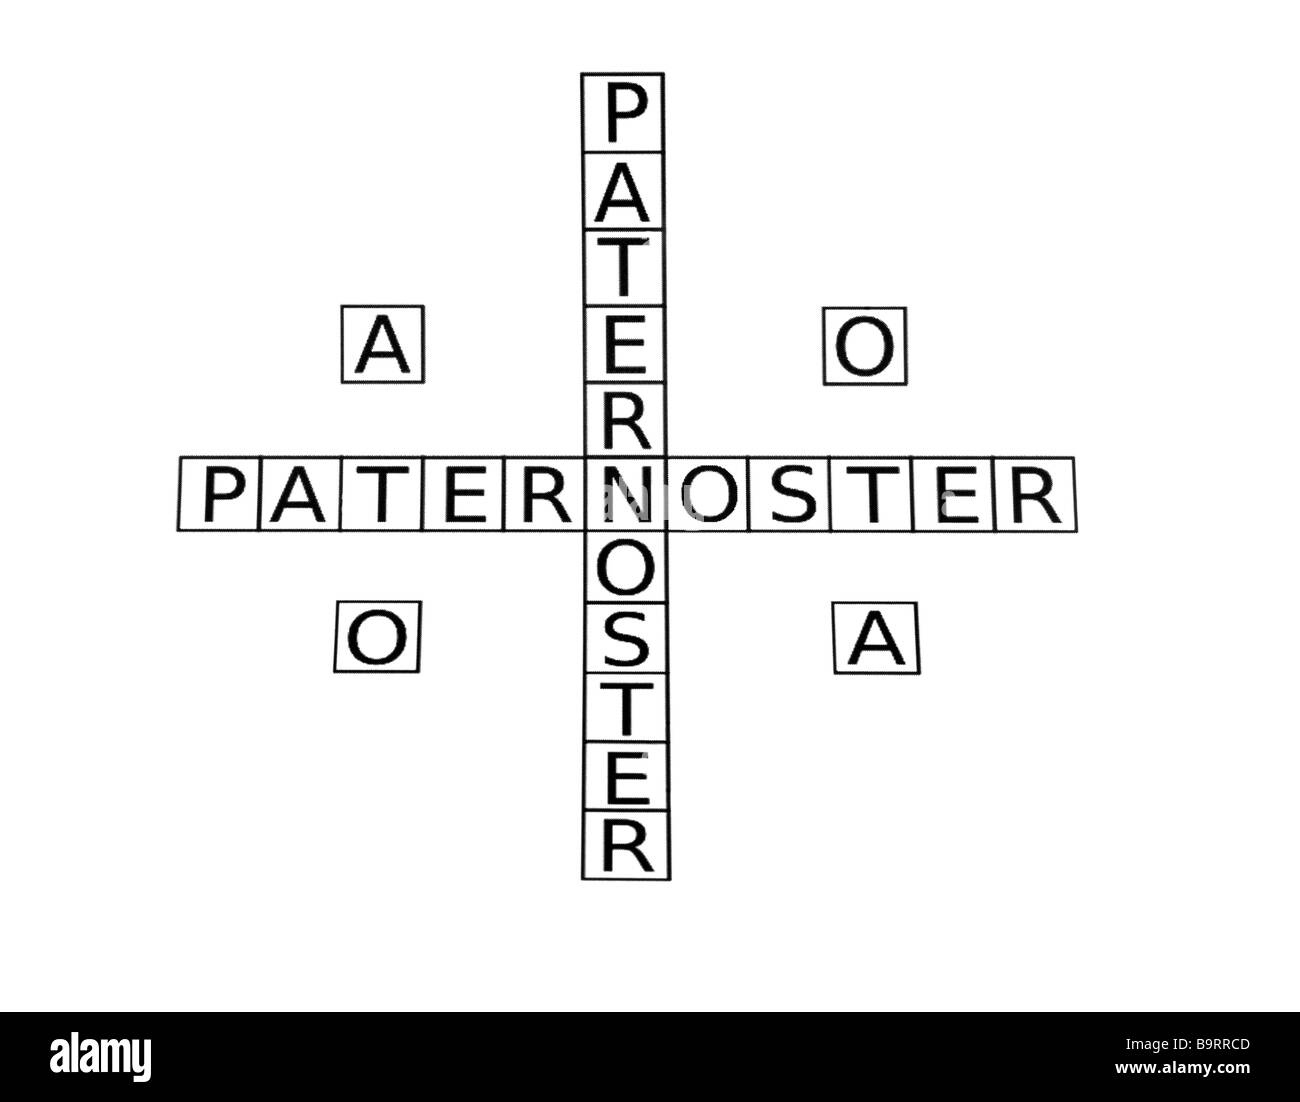 Paternoster with Alpha and Omega in the Shape of a Cross Stock Photo